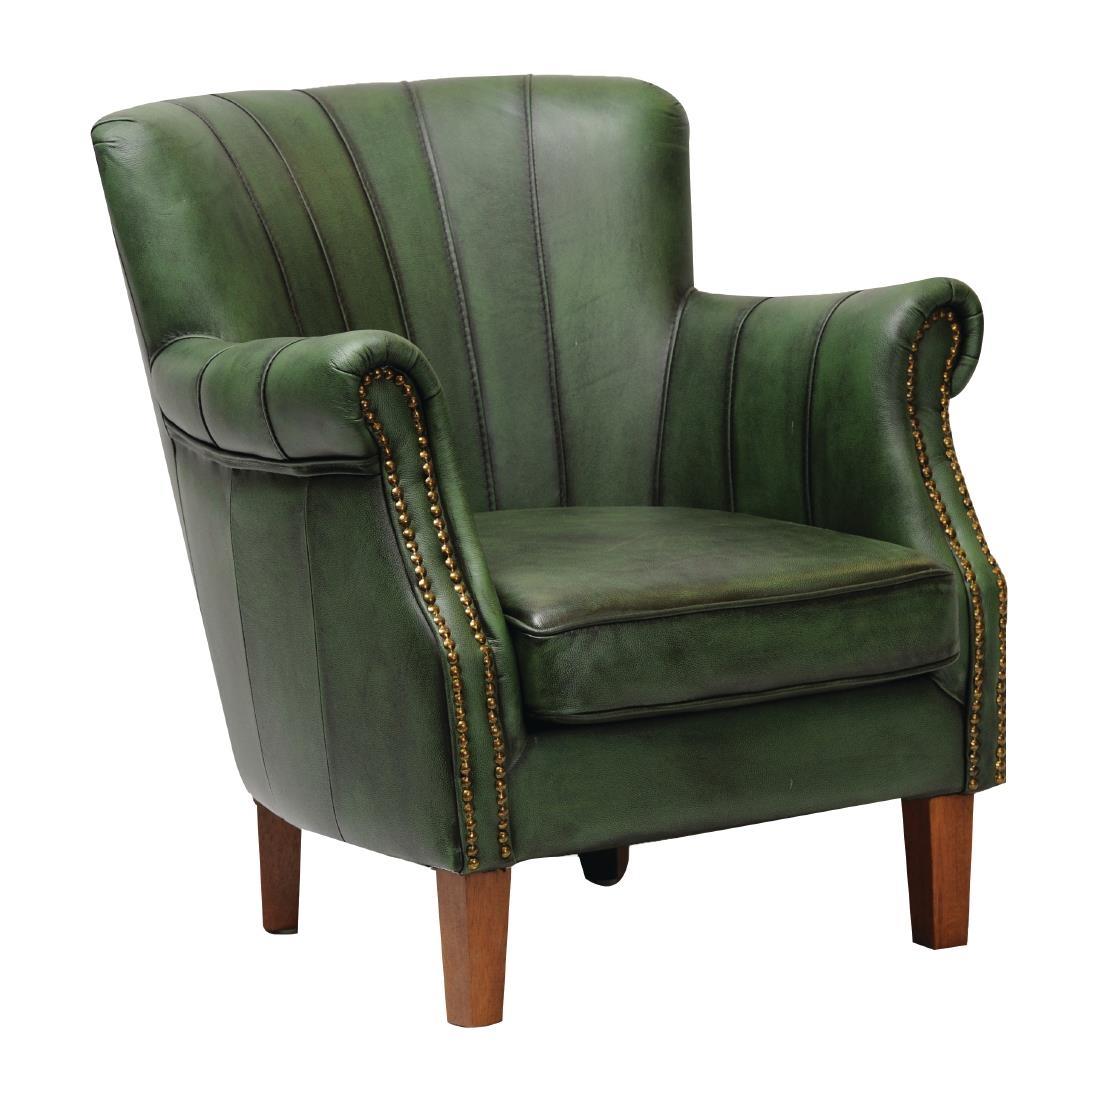 Lancaster Leather Chair Green - FT443  - 1